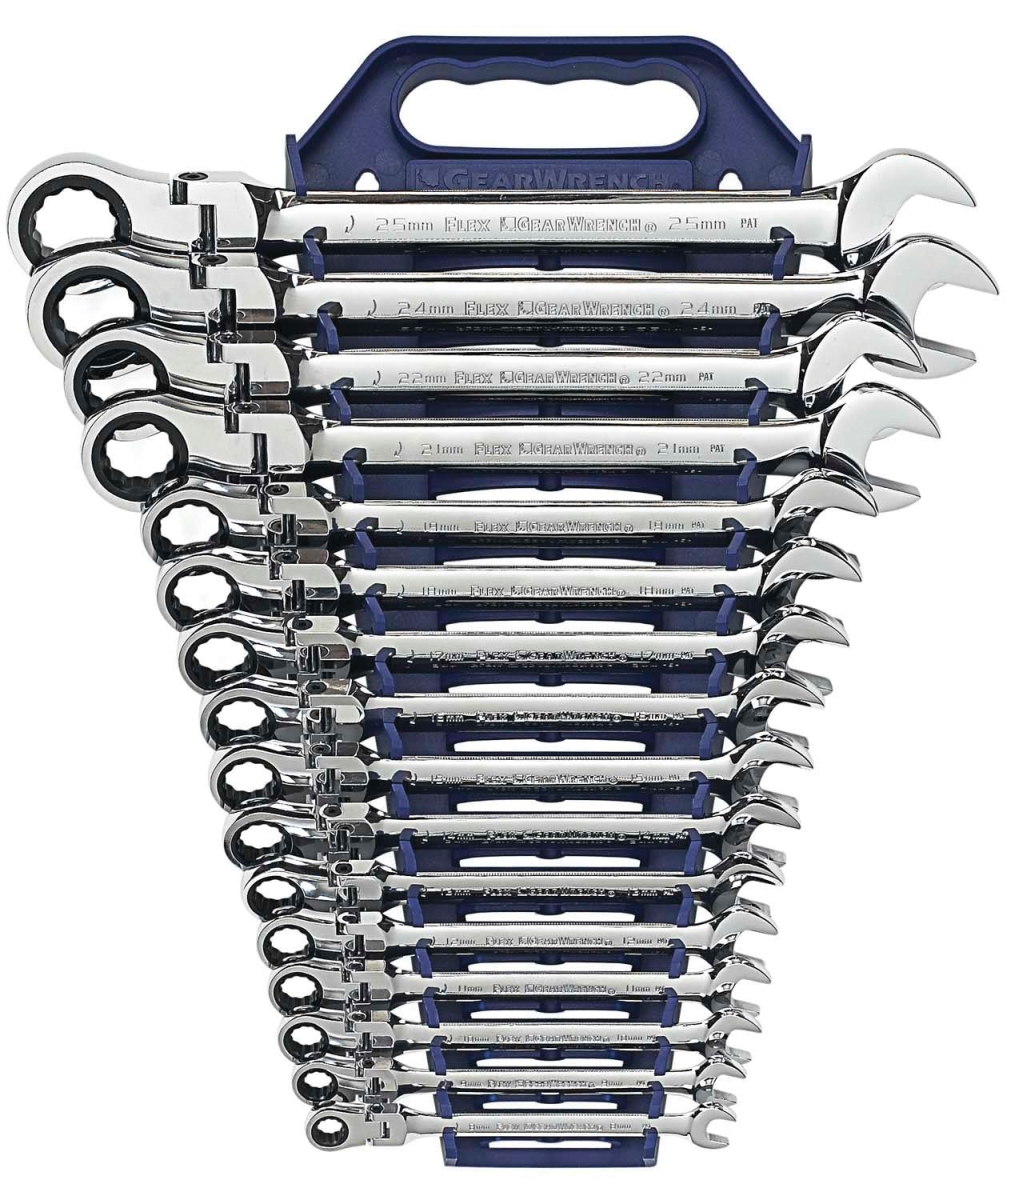 KDT-9902D 12 Point Flex Head Ratcheting Combination Metric Wrench Set - 16 Piece -  Gearwrench